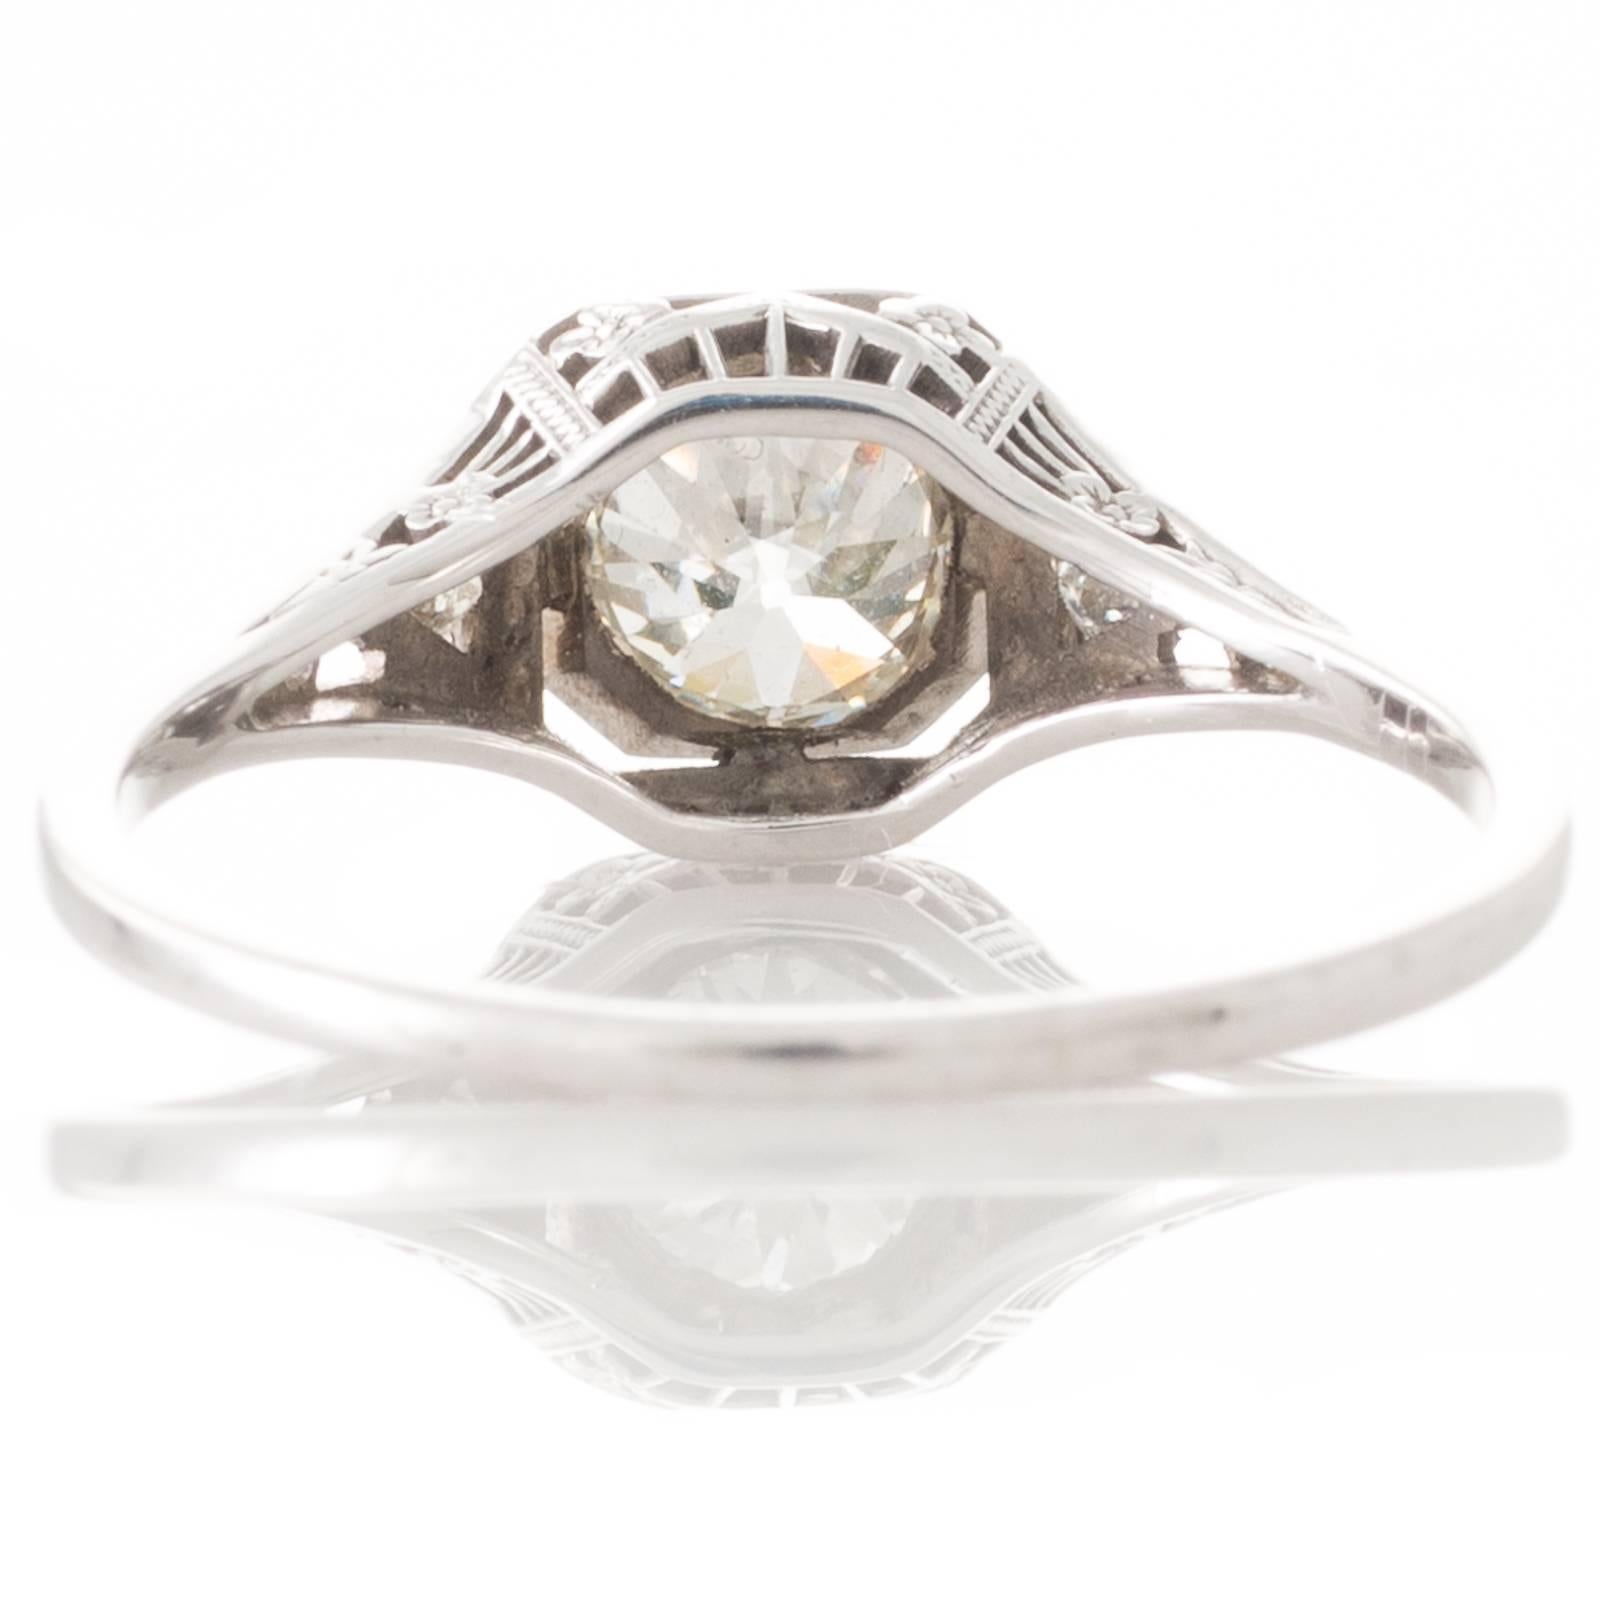 Women's Art Deco 1.02 Carat Old Cut Diamond and Platinum Solitaire Ring For Sale